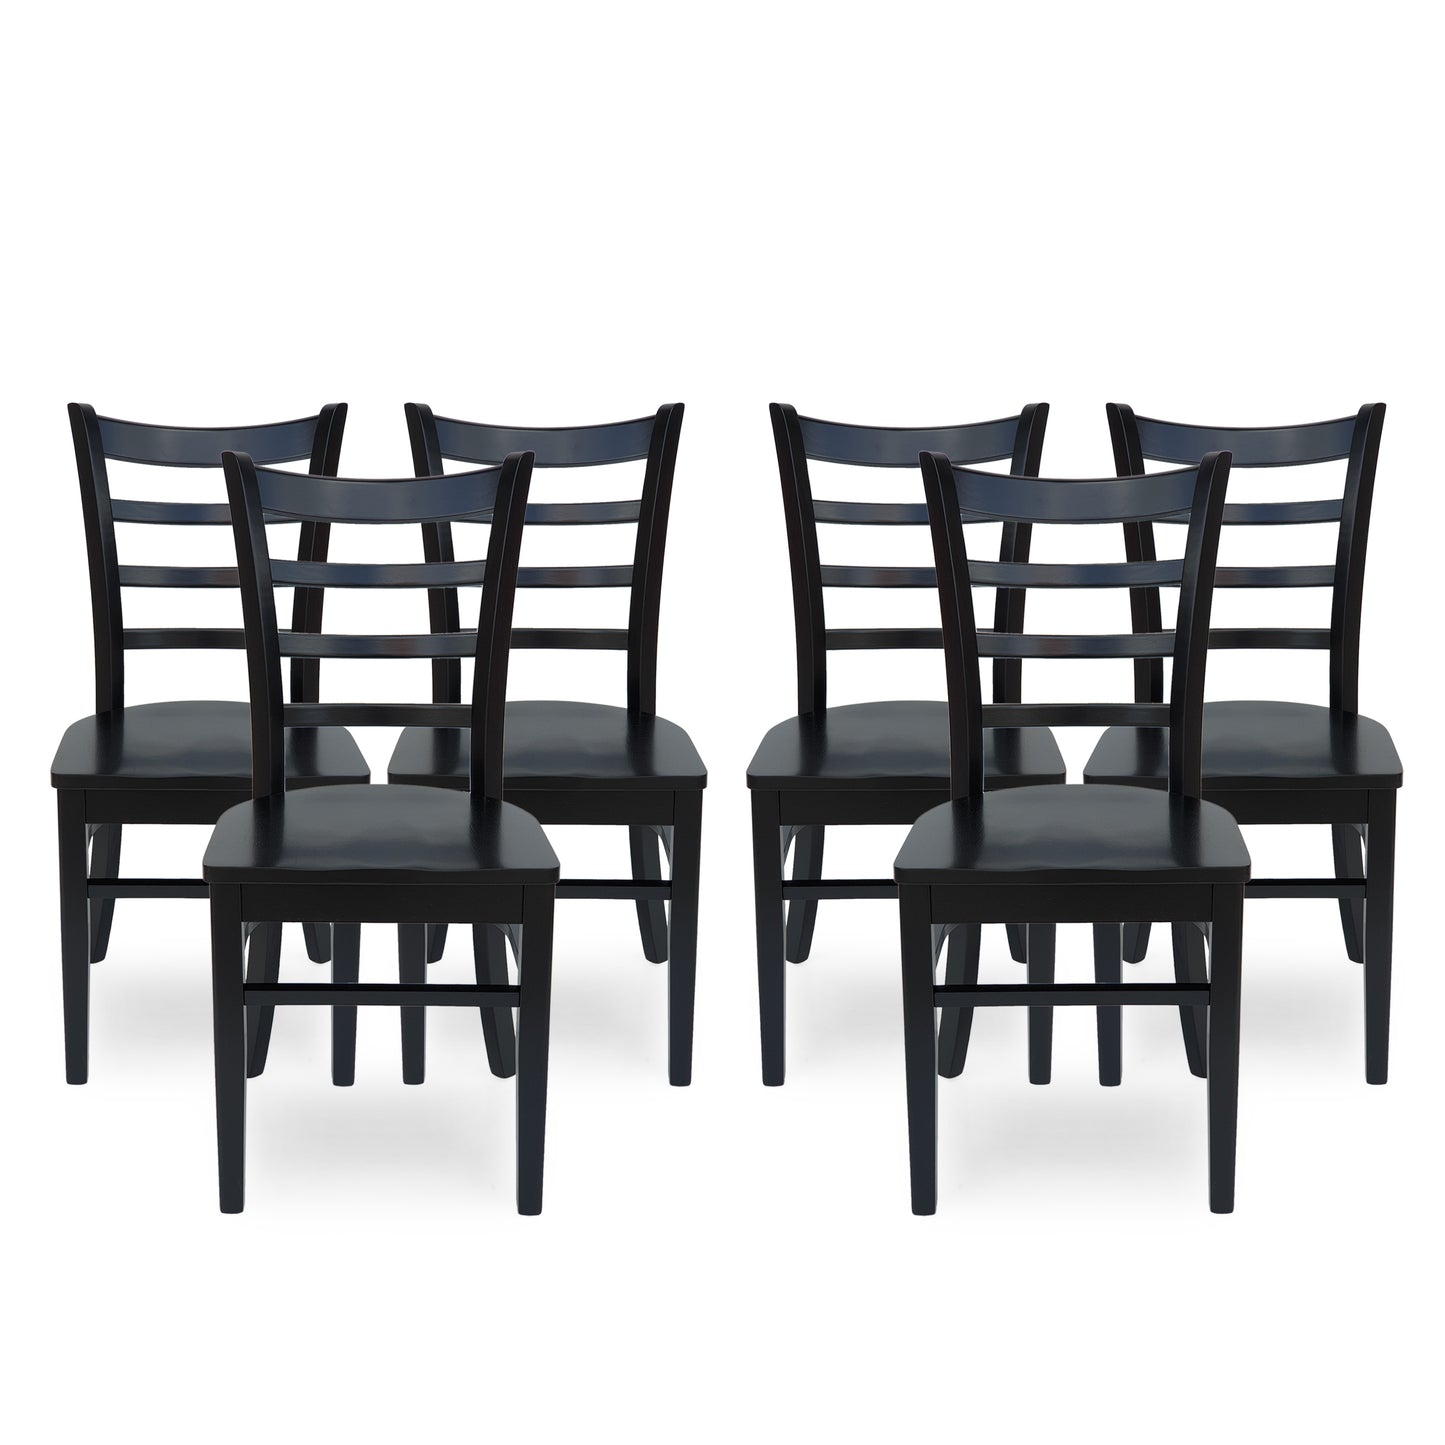 Wagner Farmhouse Wooden Dining Chairs (Set of 6)